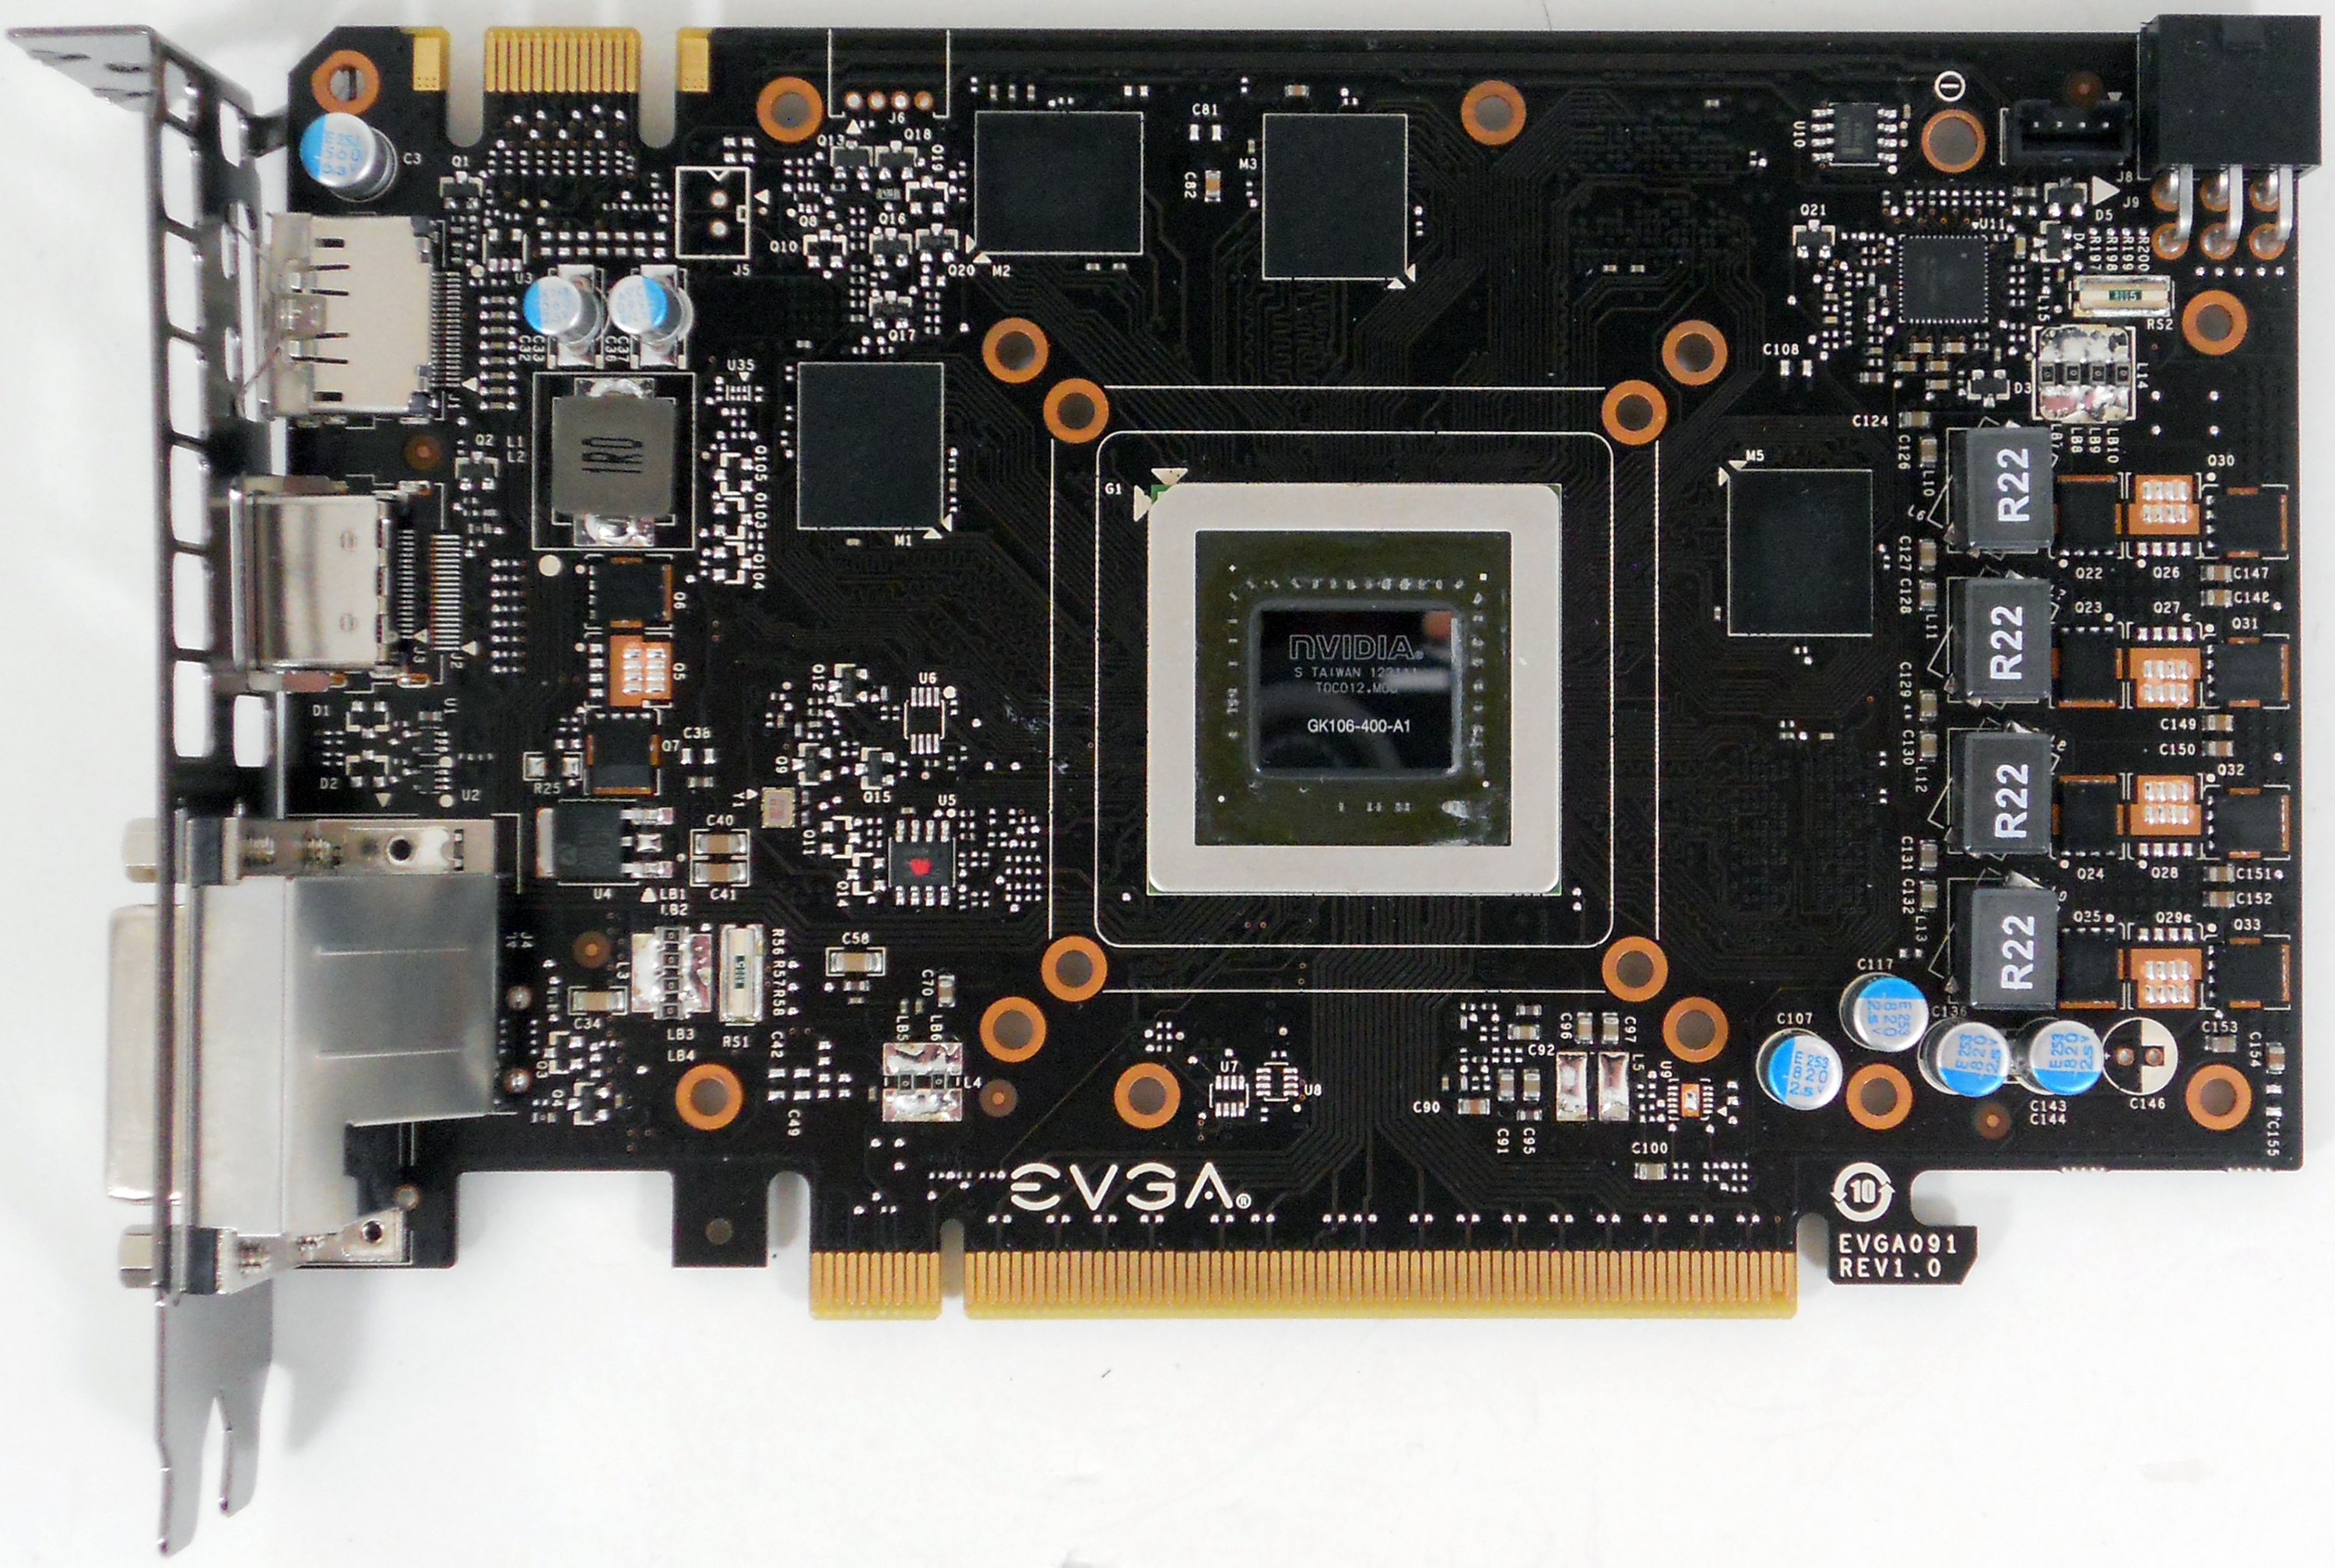 Meet The Geforce Gtx 660 The Nvidia Geforce Gtx 660 Review Gk106 Fills Out The Kepler Family